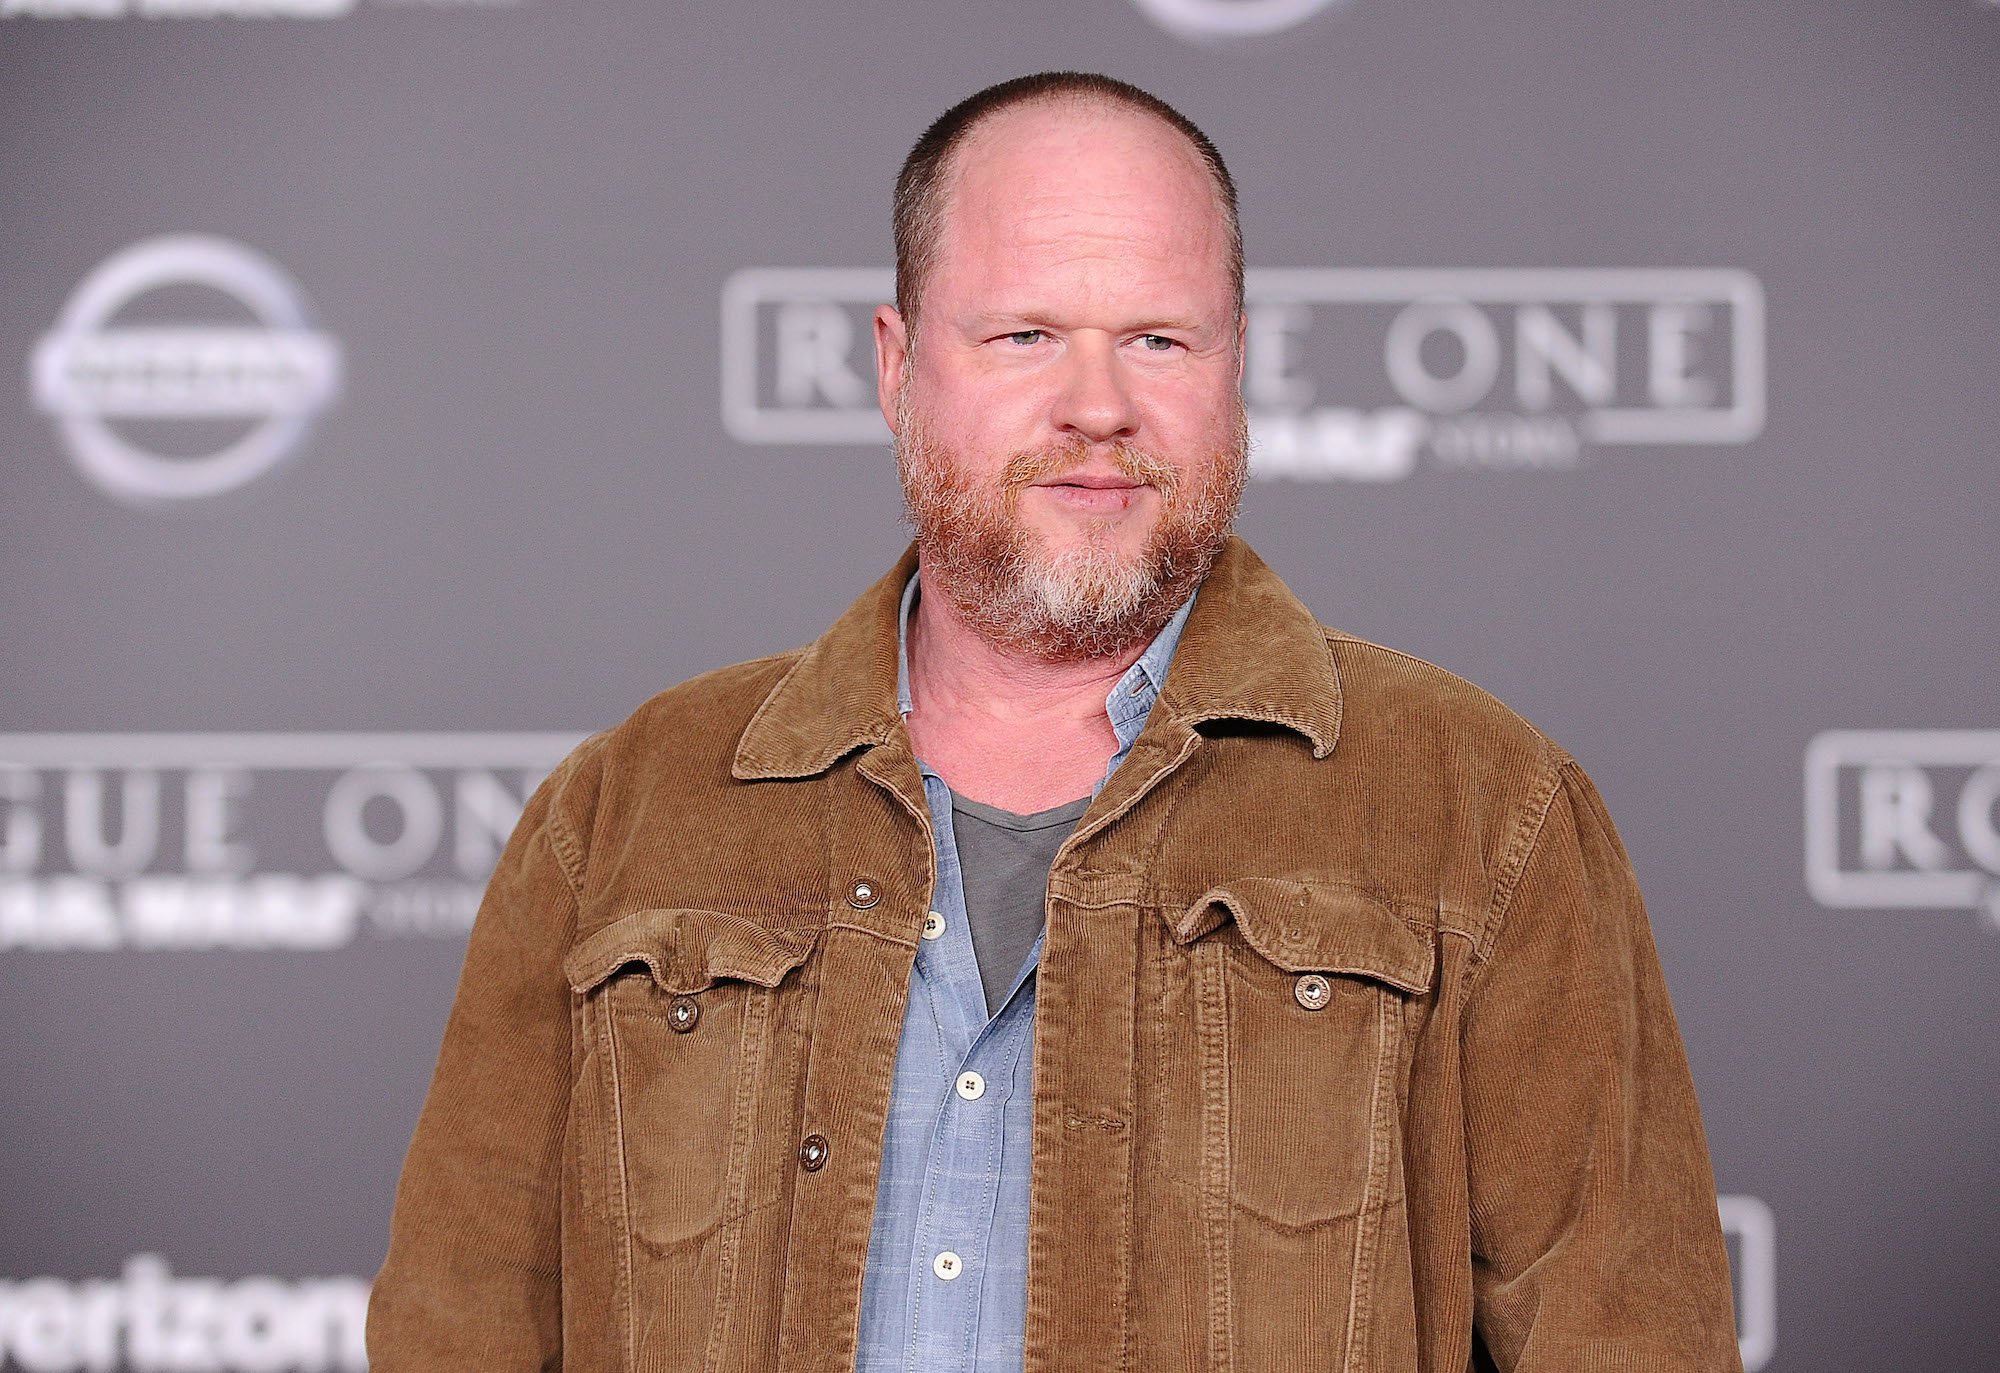 Joss Whedon looking away from the camera in front of a gray background